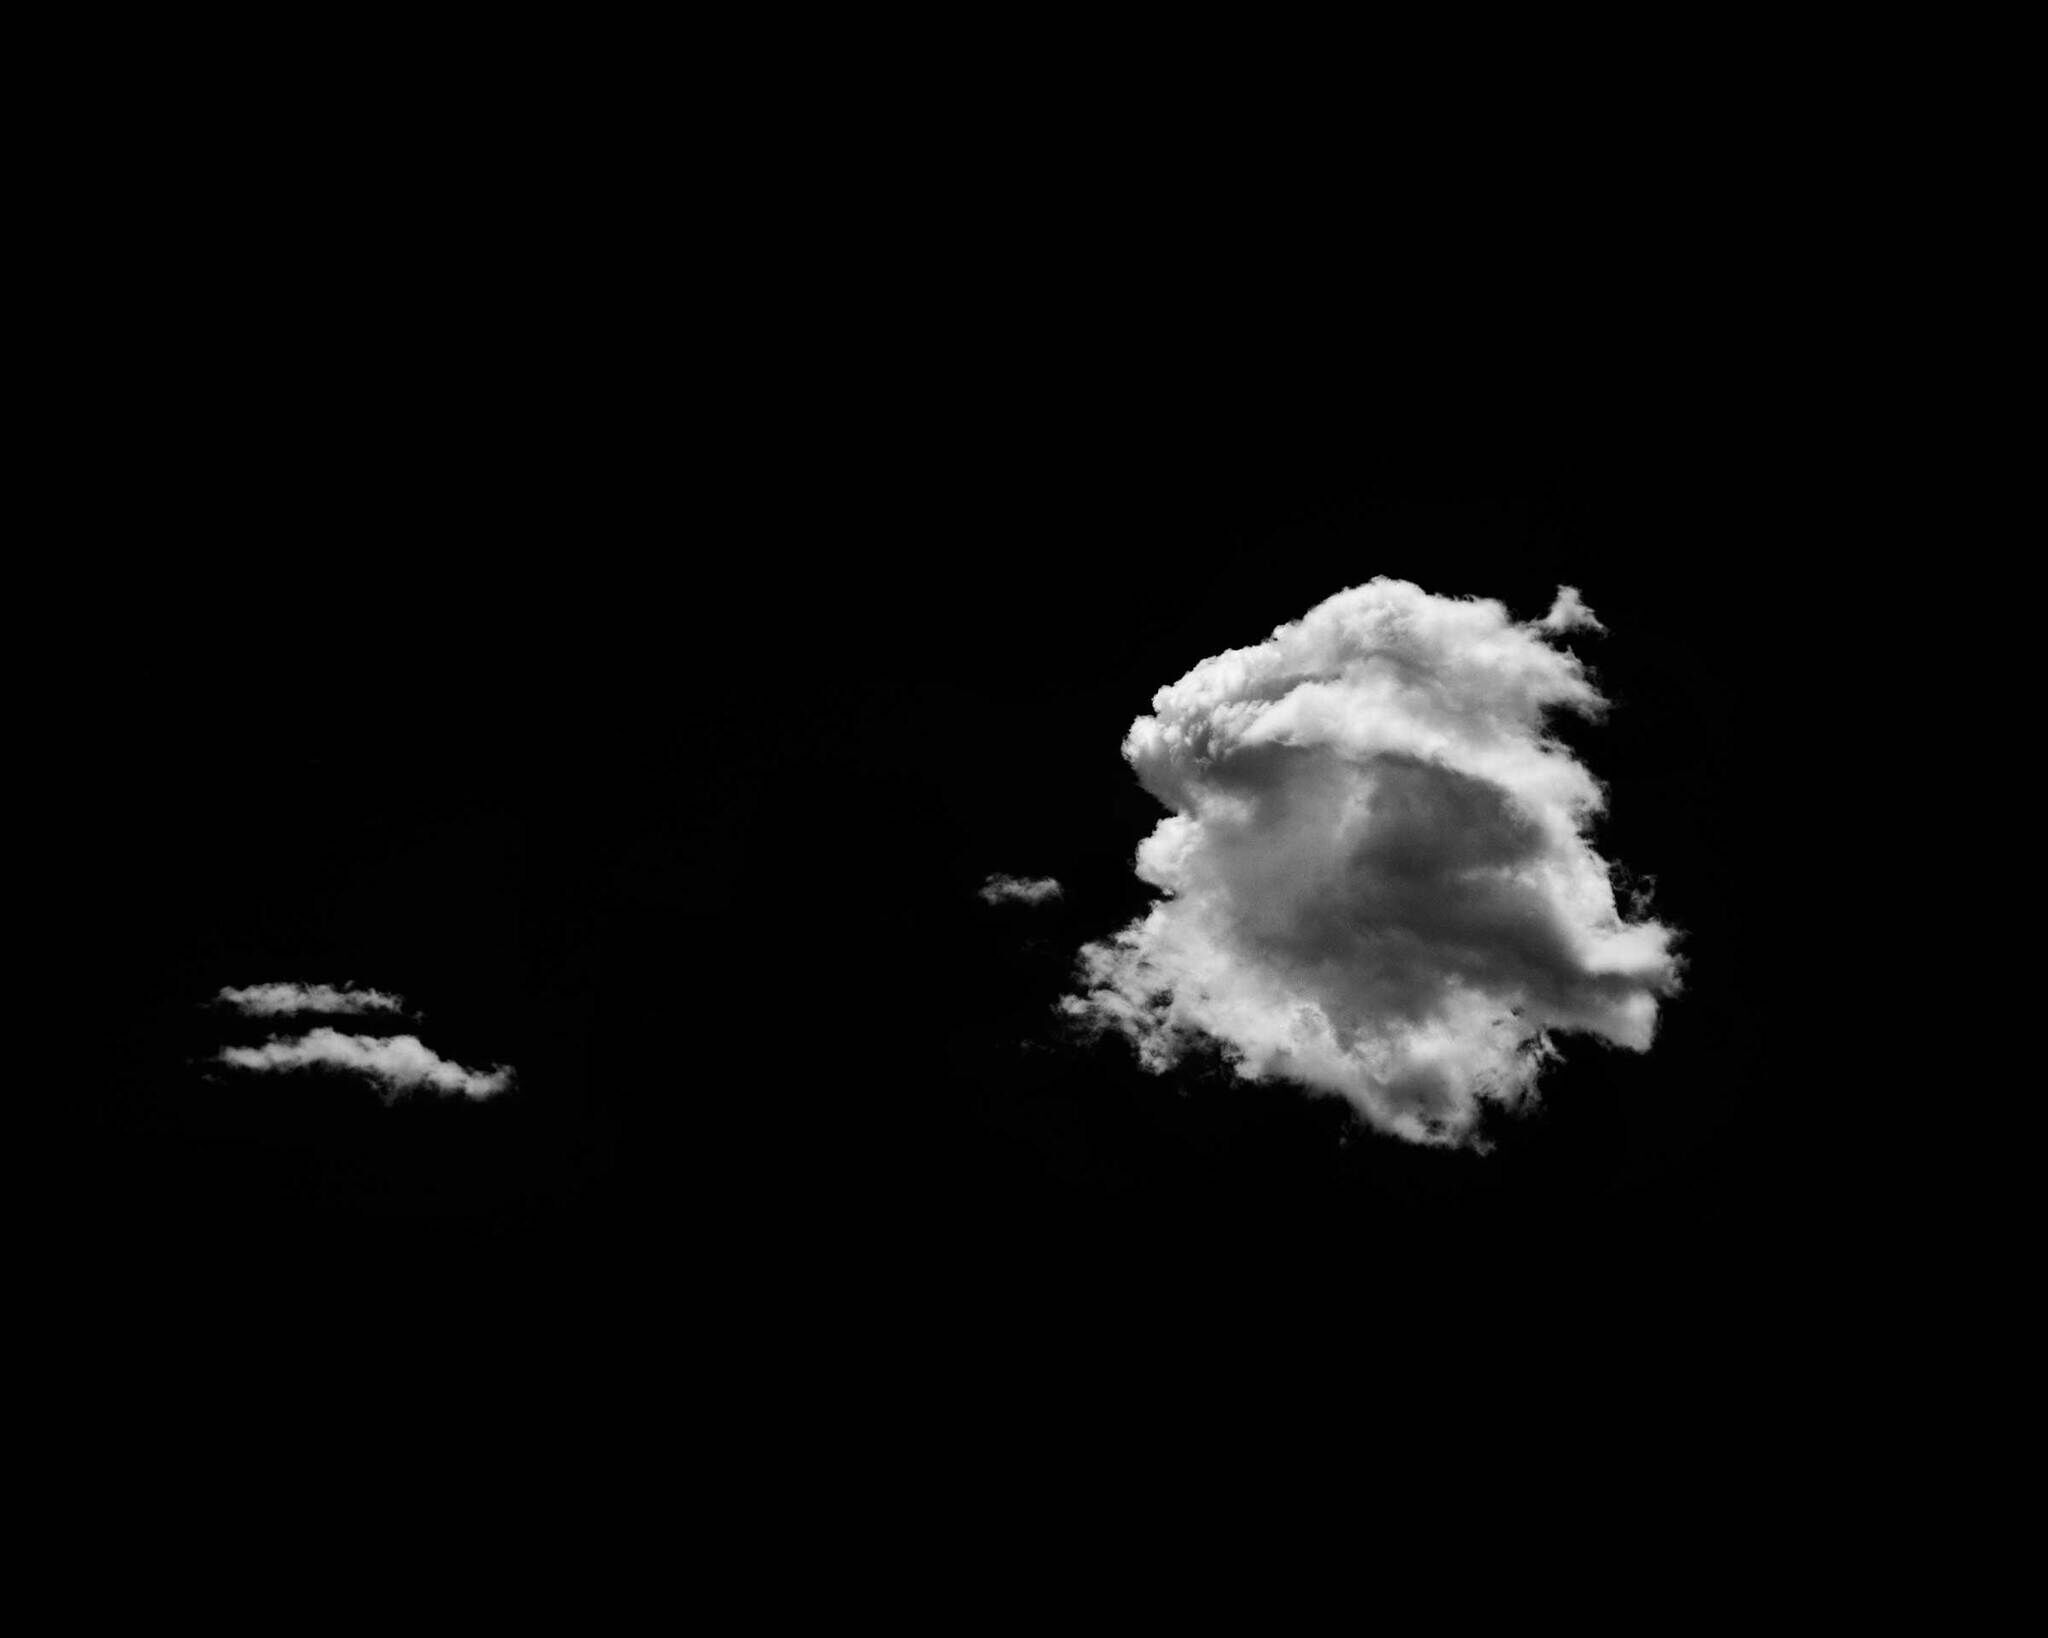 White clouds against a black background, with one large cloud on the right and a smaller one on the left.